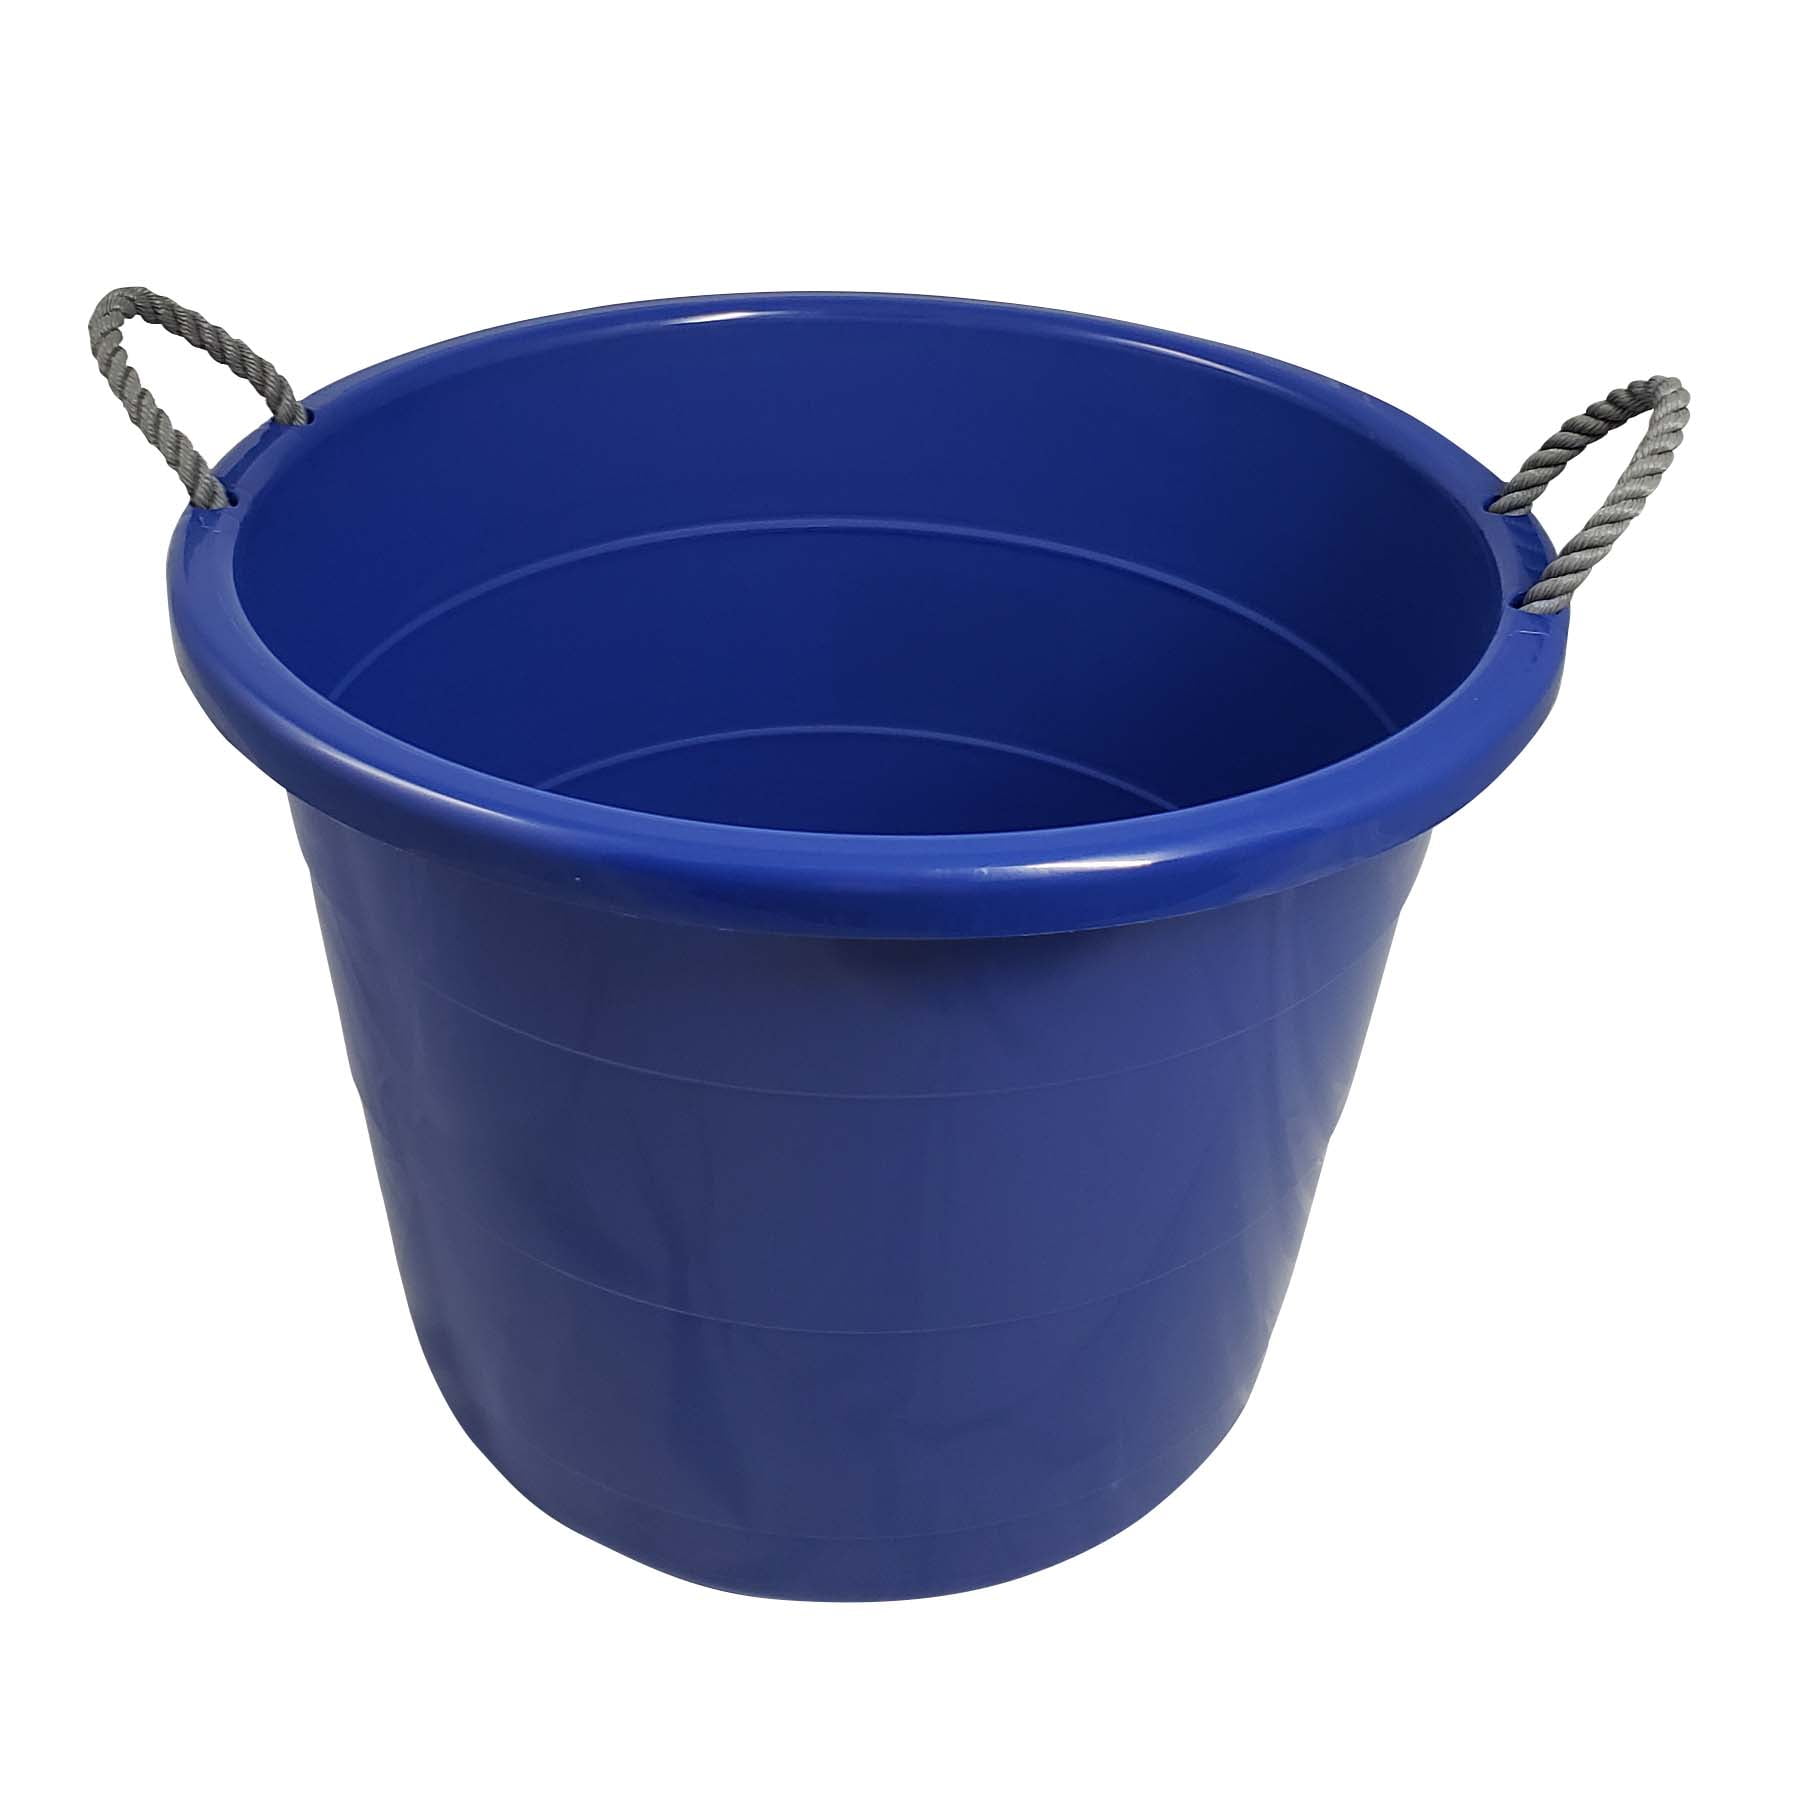 These plastic multi-purpose storage buckets are good for indoor or outdoor ...